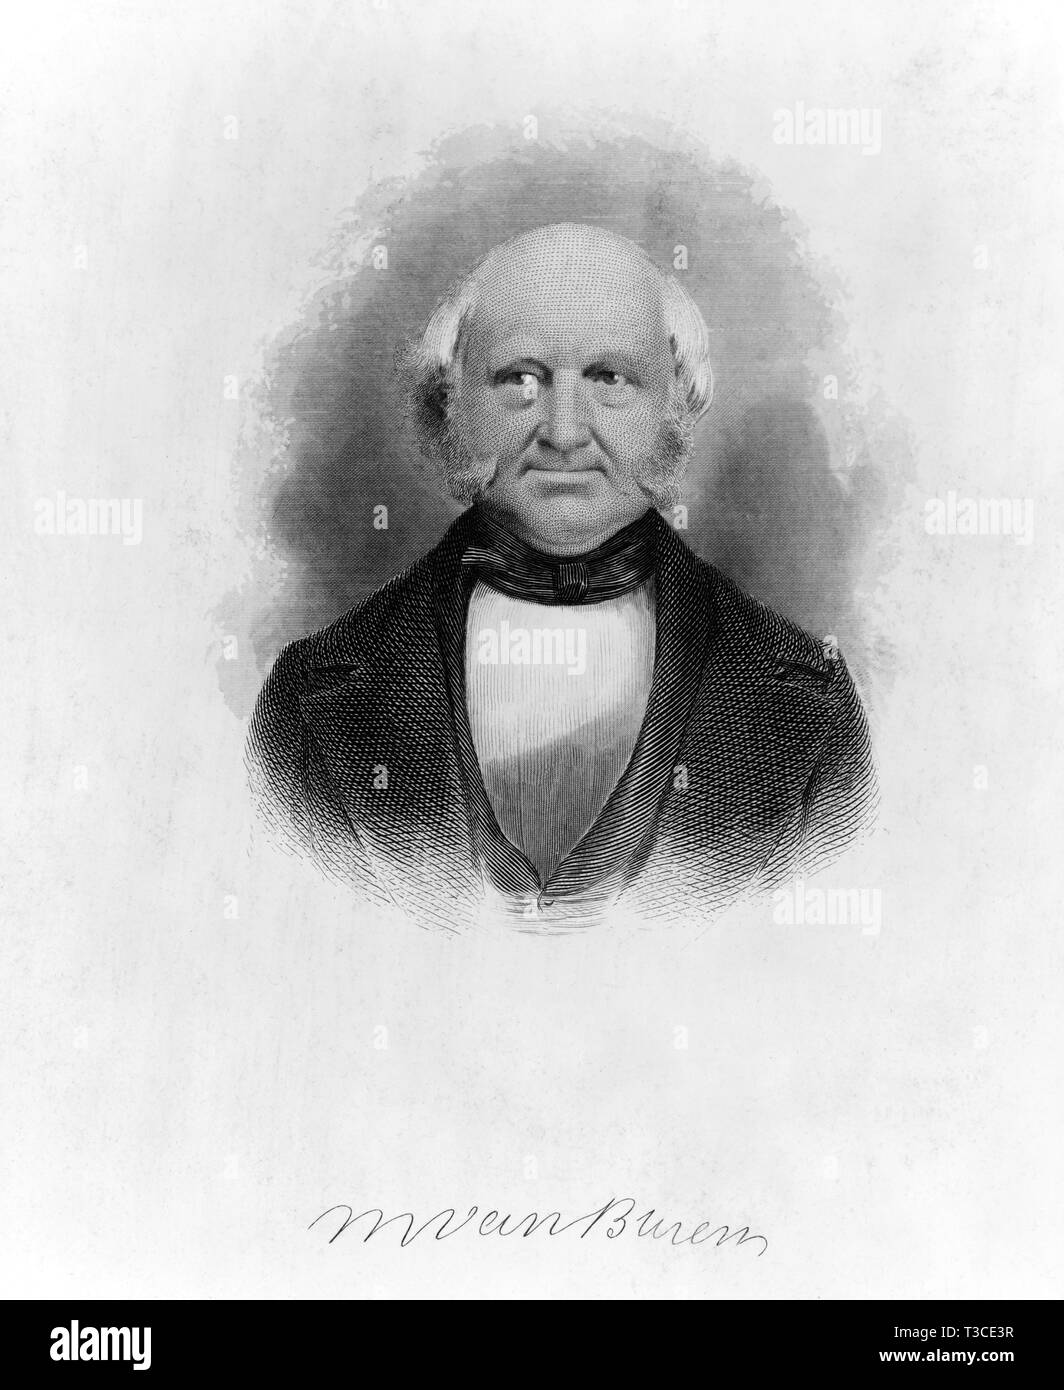 Martin Van Buren (1782-1862), 8th President of the United States, 1837-1841, Head and Shoulders Portrait, Engraving by V. Balch from a Daguerreotype Stock Photo